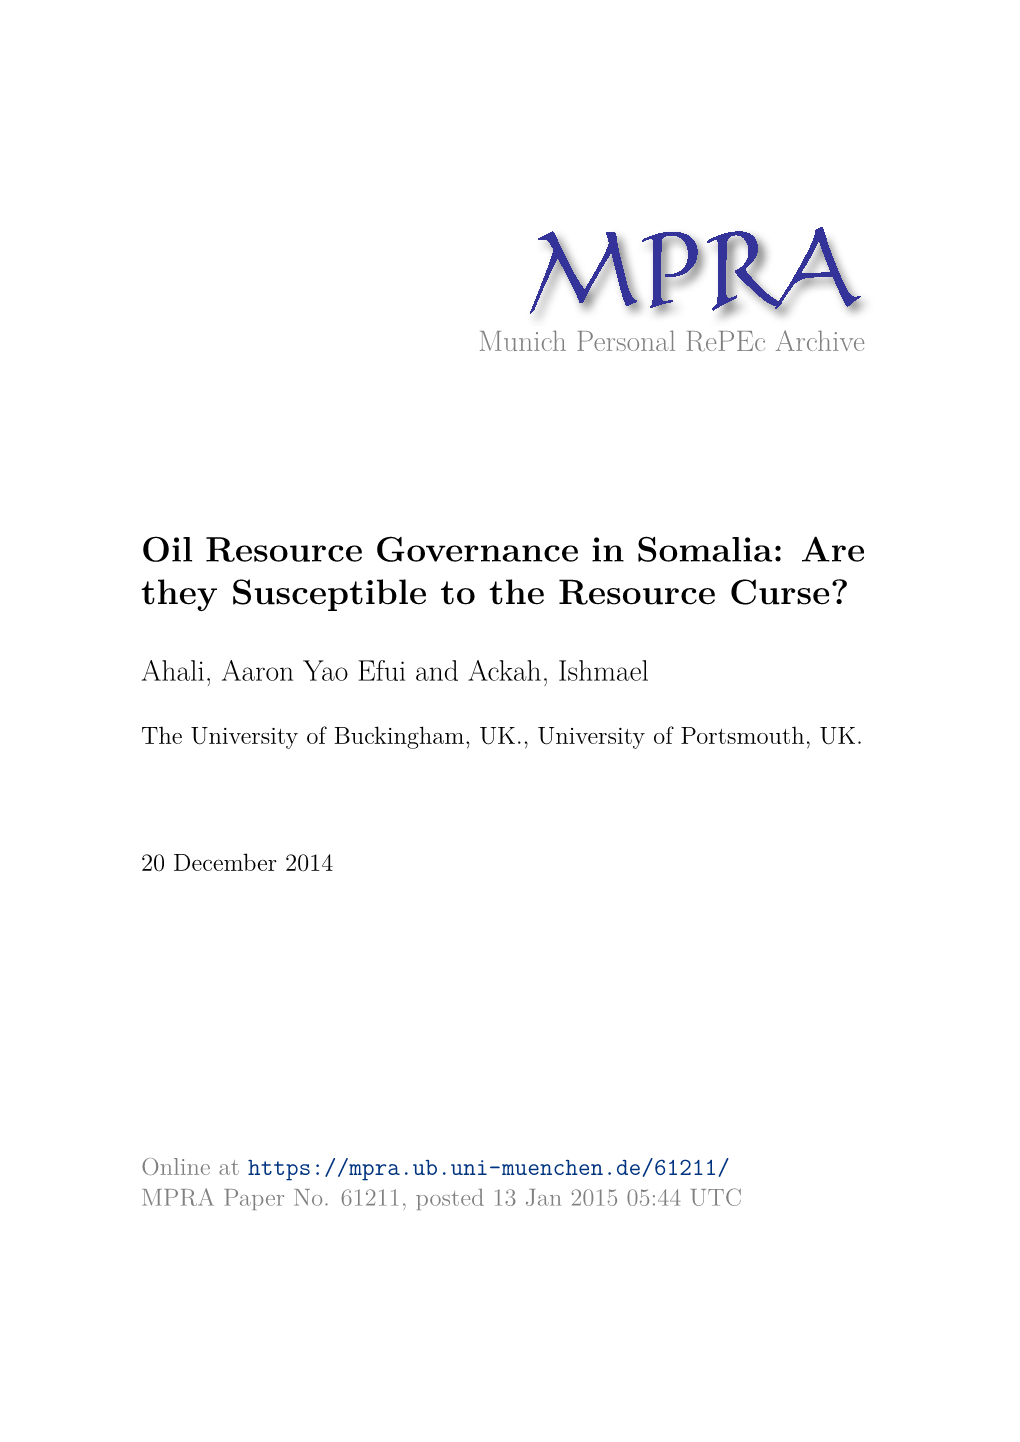 Oil Resource Governance in Somalia: Are They Susceptible to the Resource Curse?